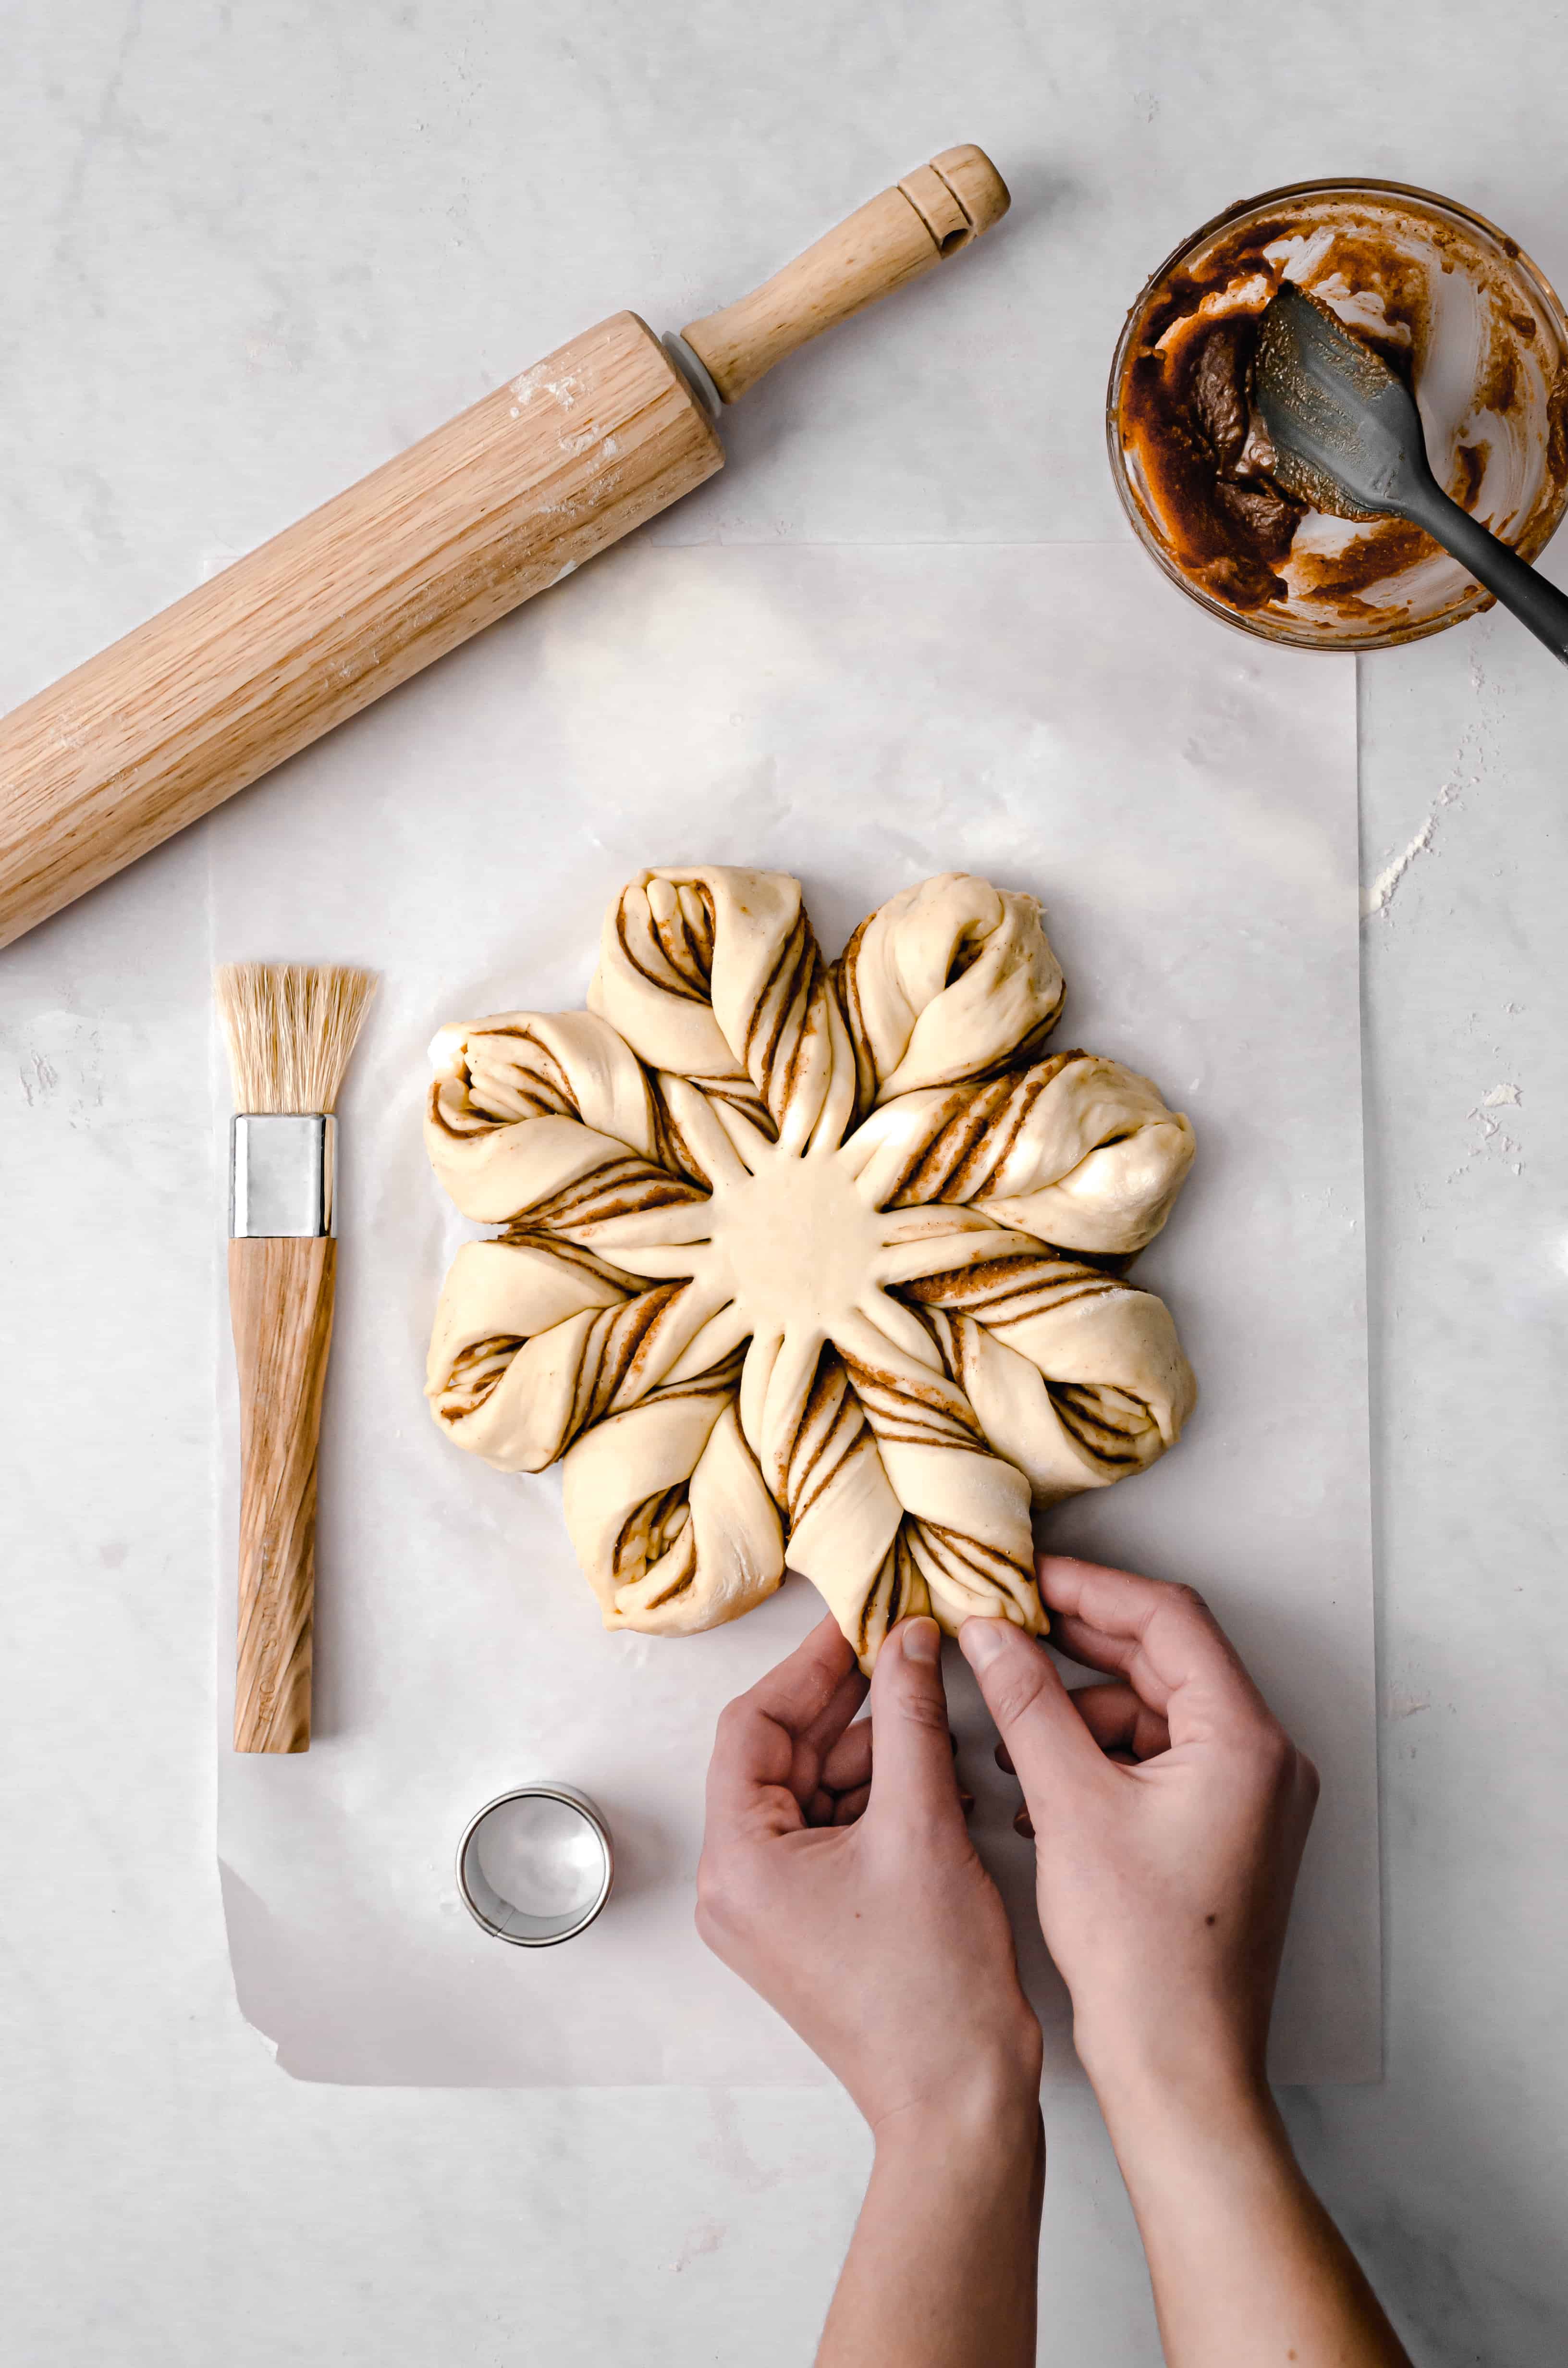 assembly of star bread with hands demonstrating how to shape it 